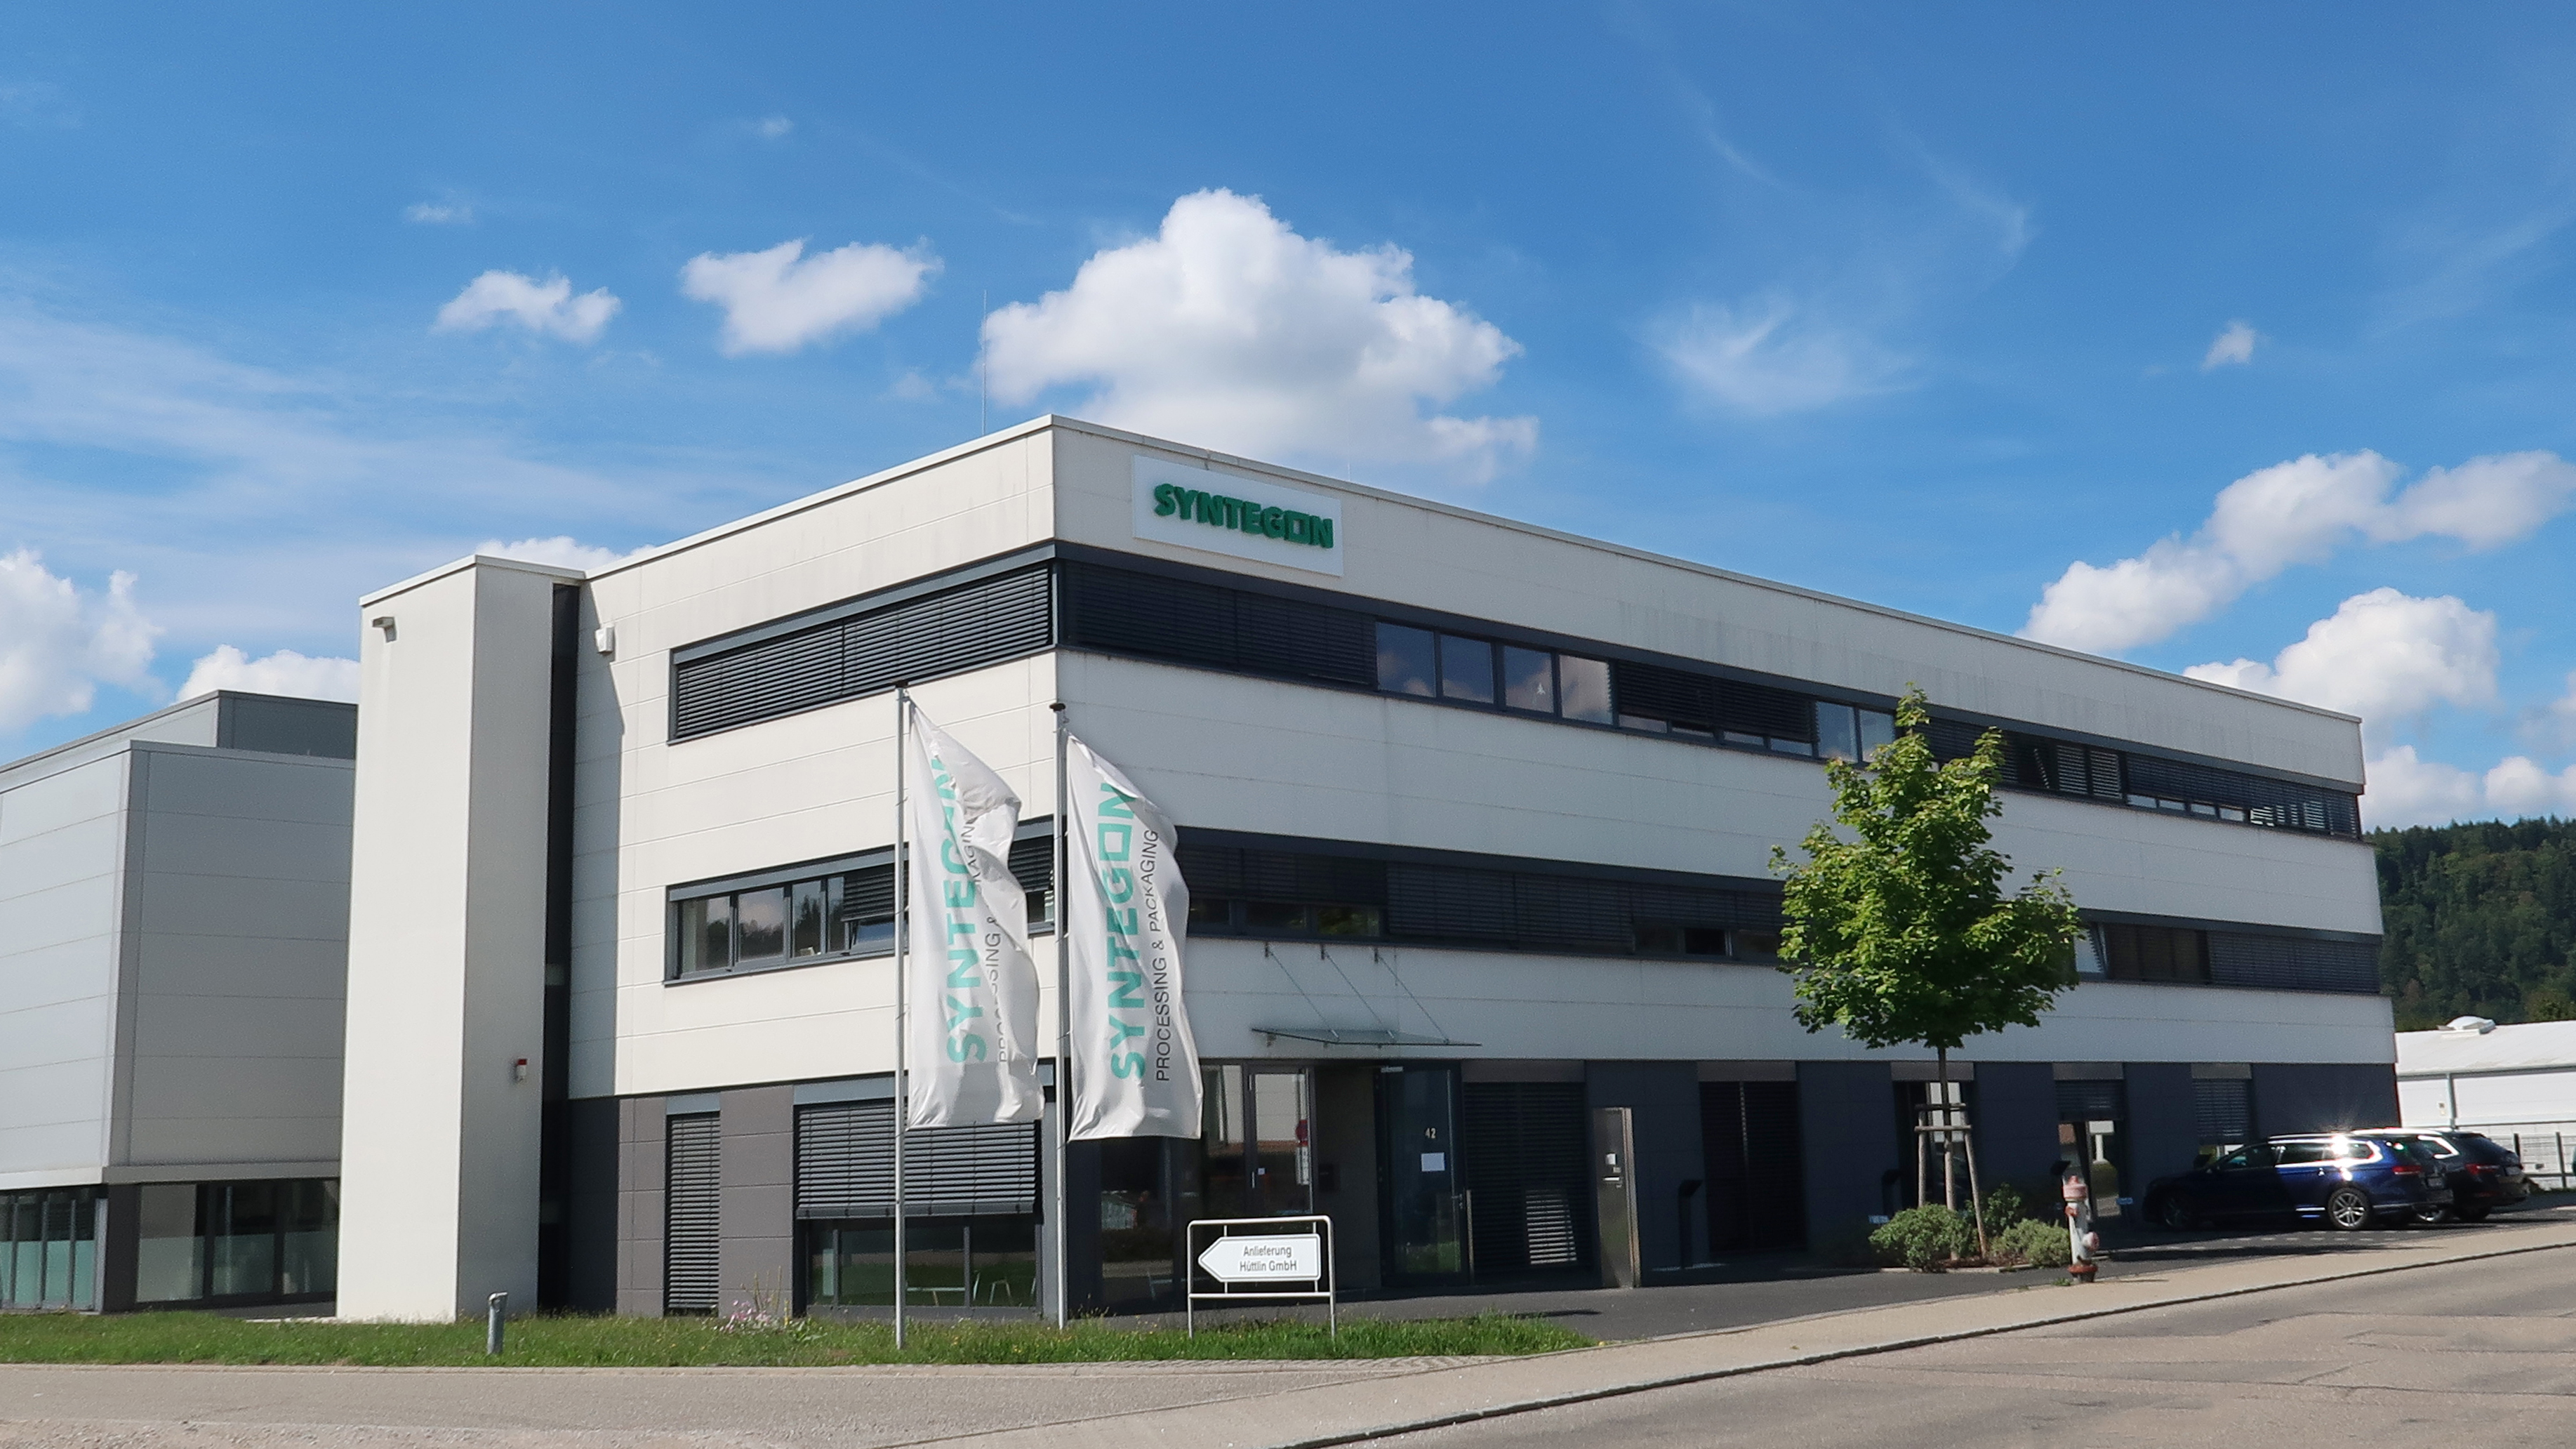 By 2025, Hüttlin GmbH aims to reduce its CO2 emissions by 25 percent compared to 2019.